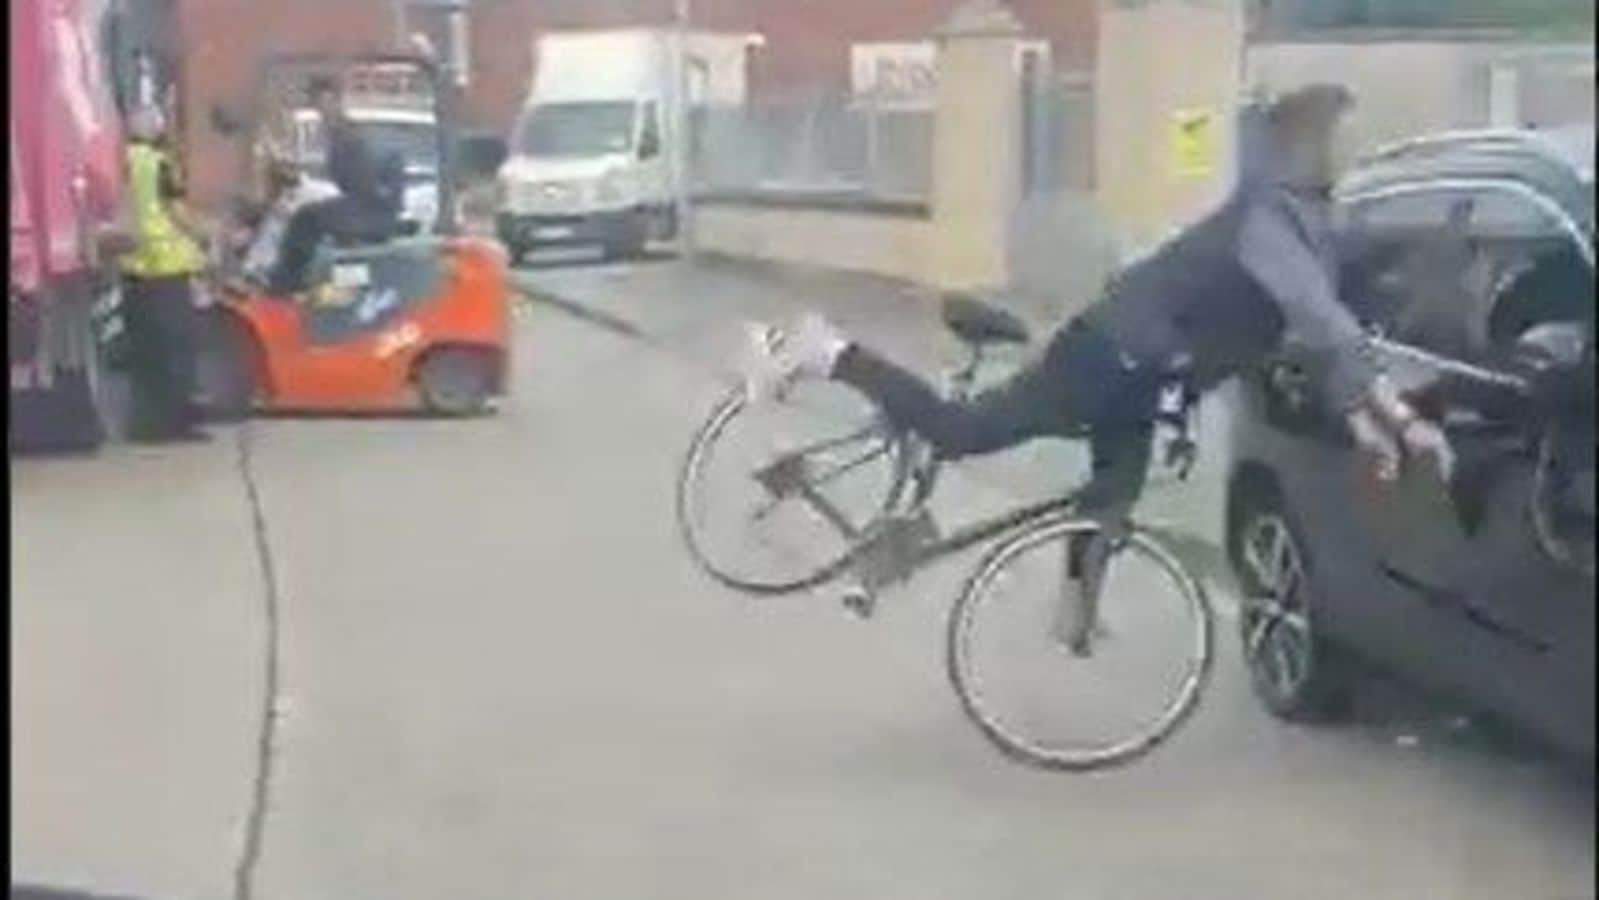 Road rage gone right? Abusive cyclist crashes into parked car | Auto News